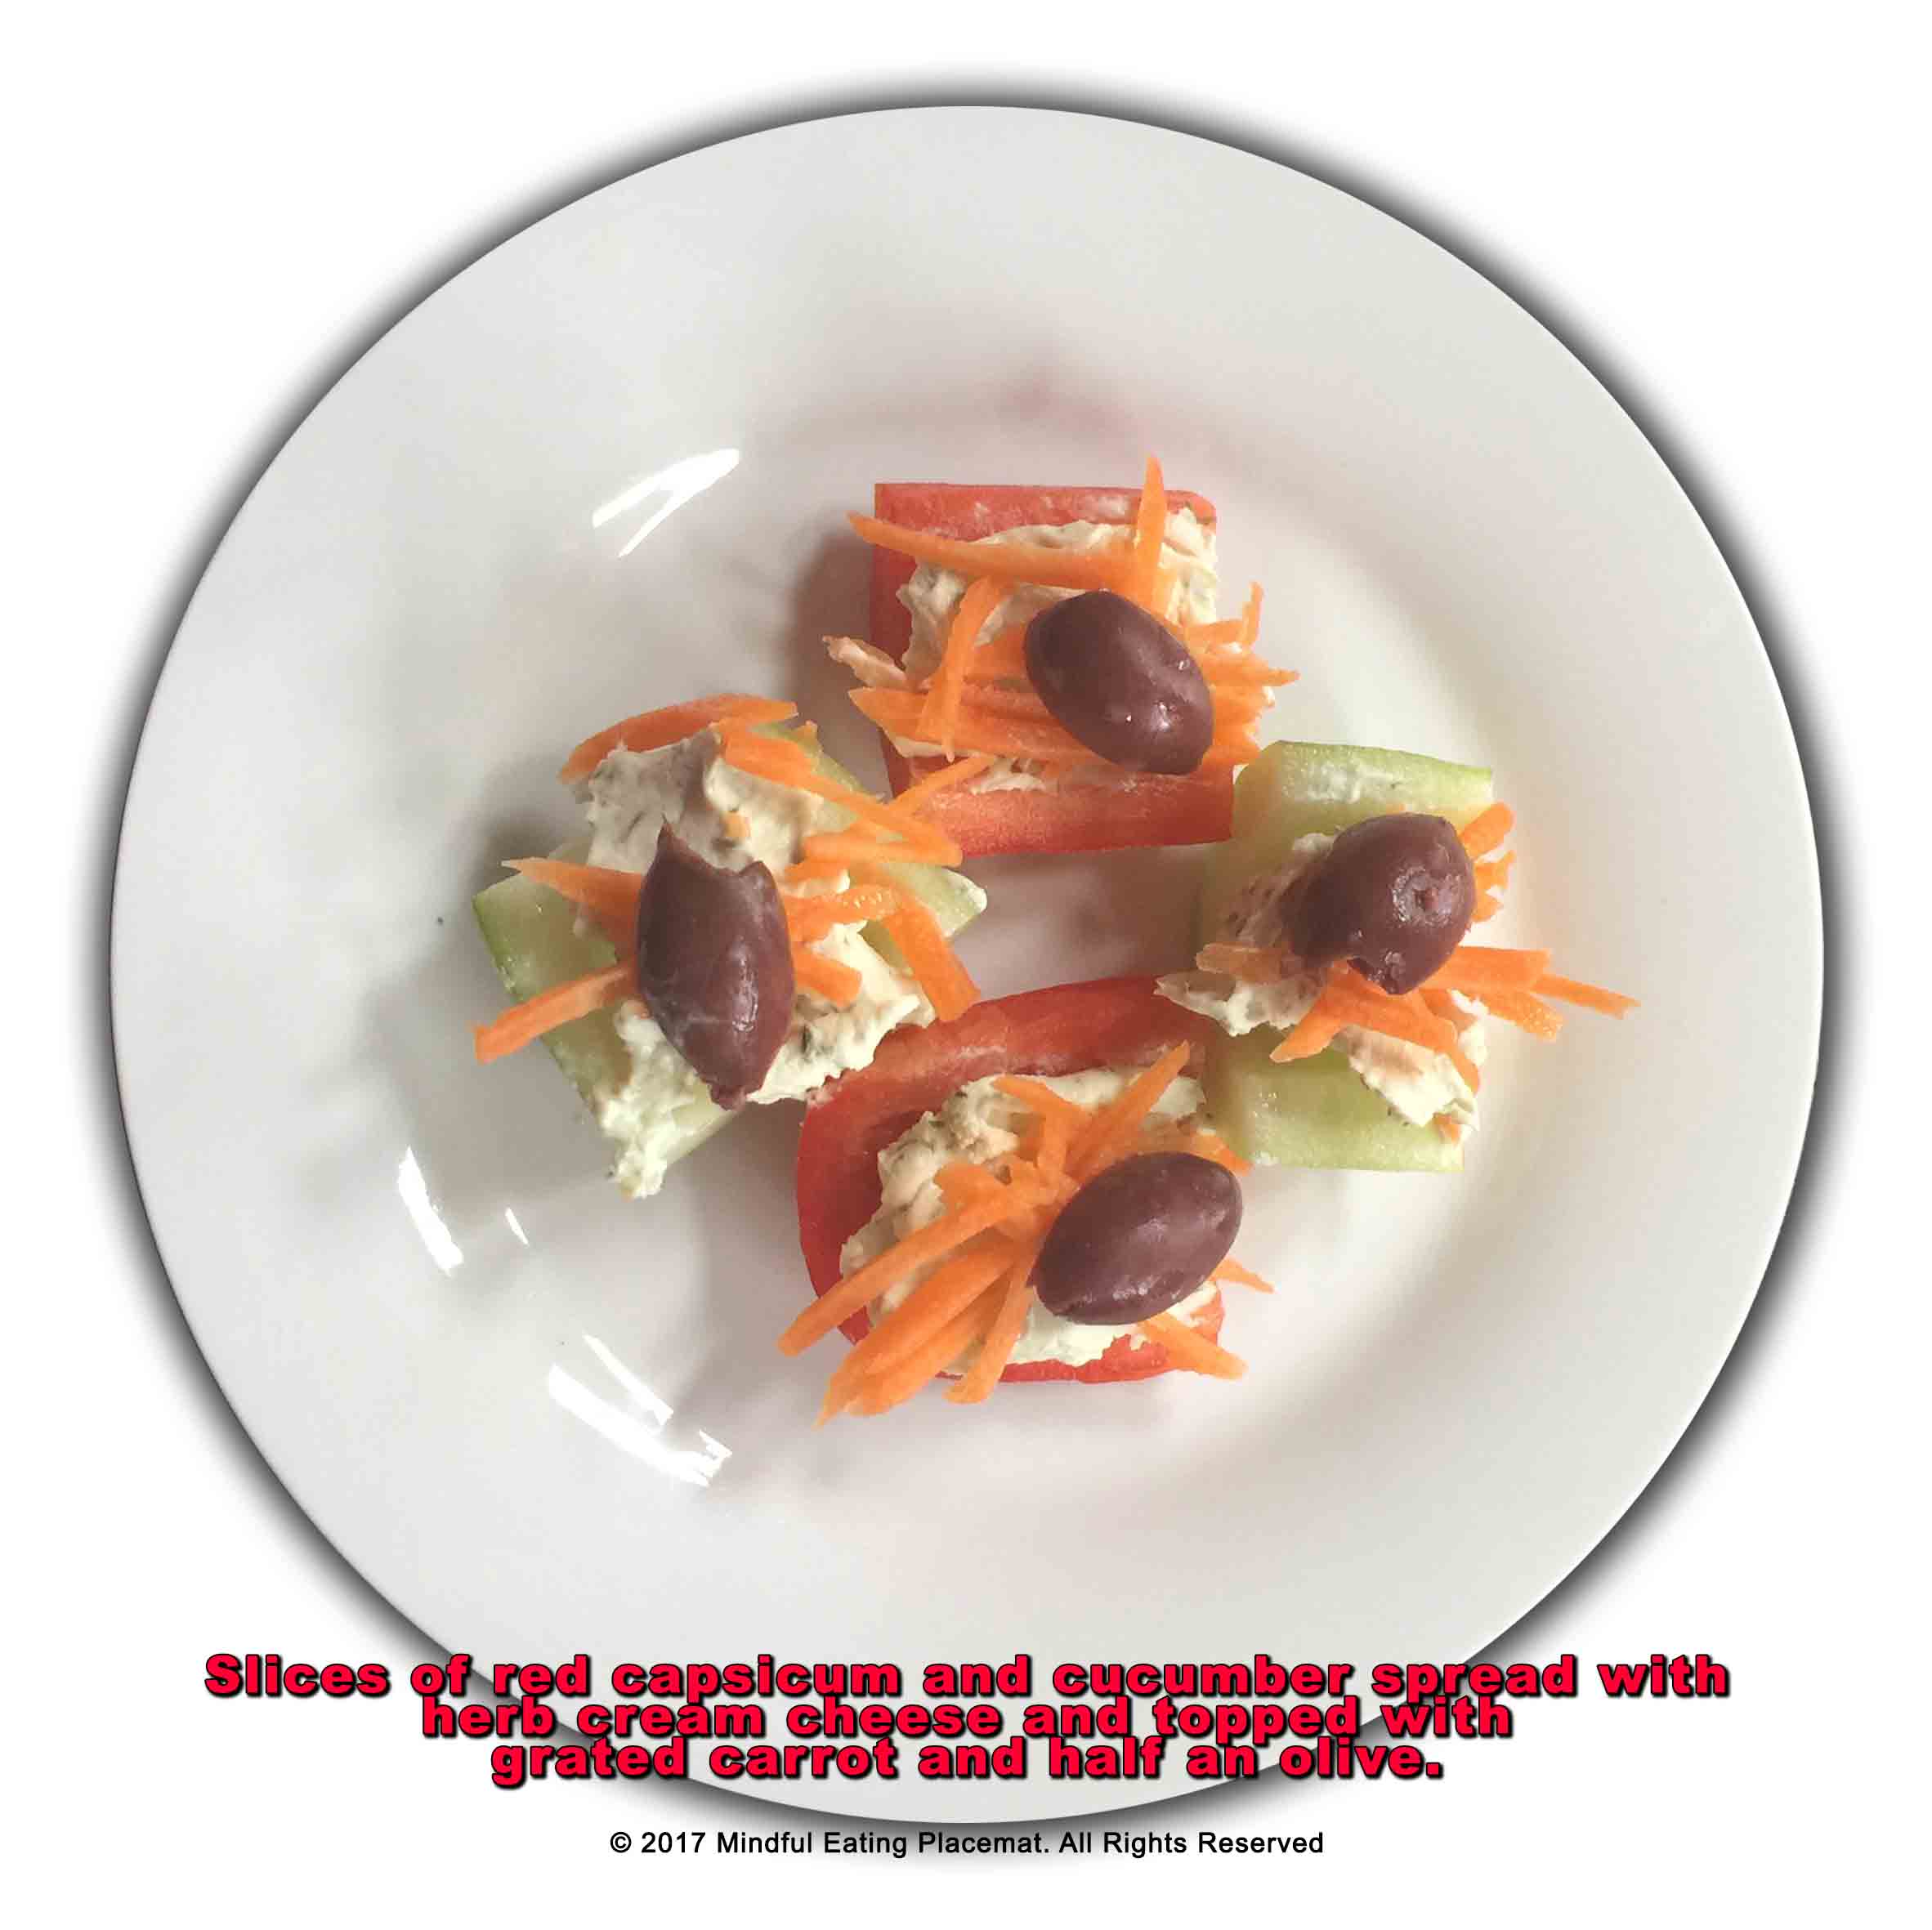 Cucumber and red capsicum slices with herb cream cheese, carrot and half an olive 